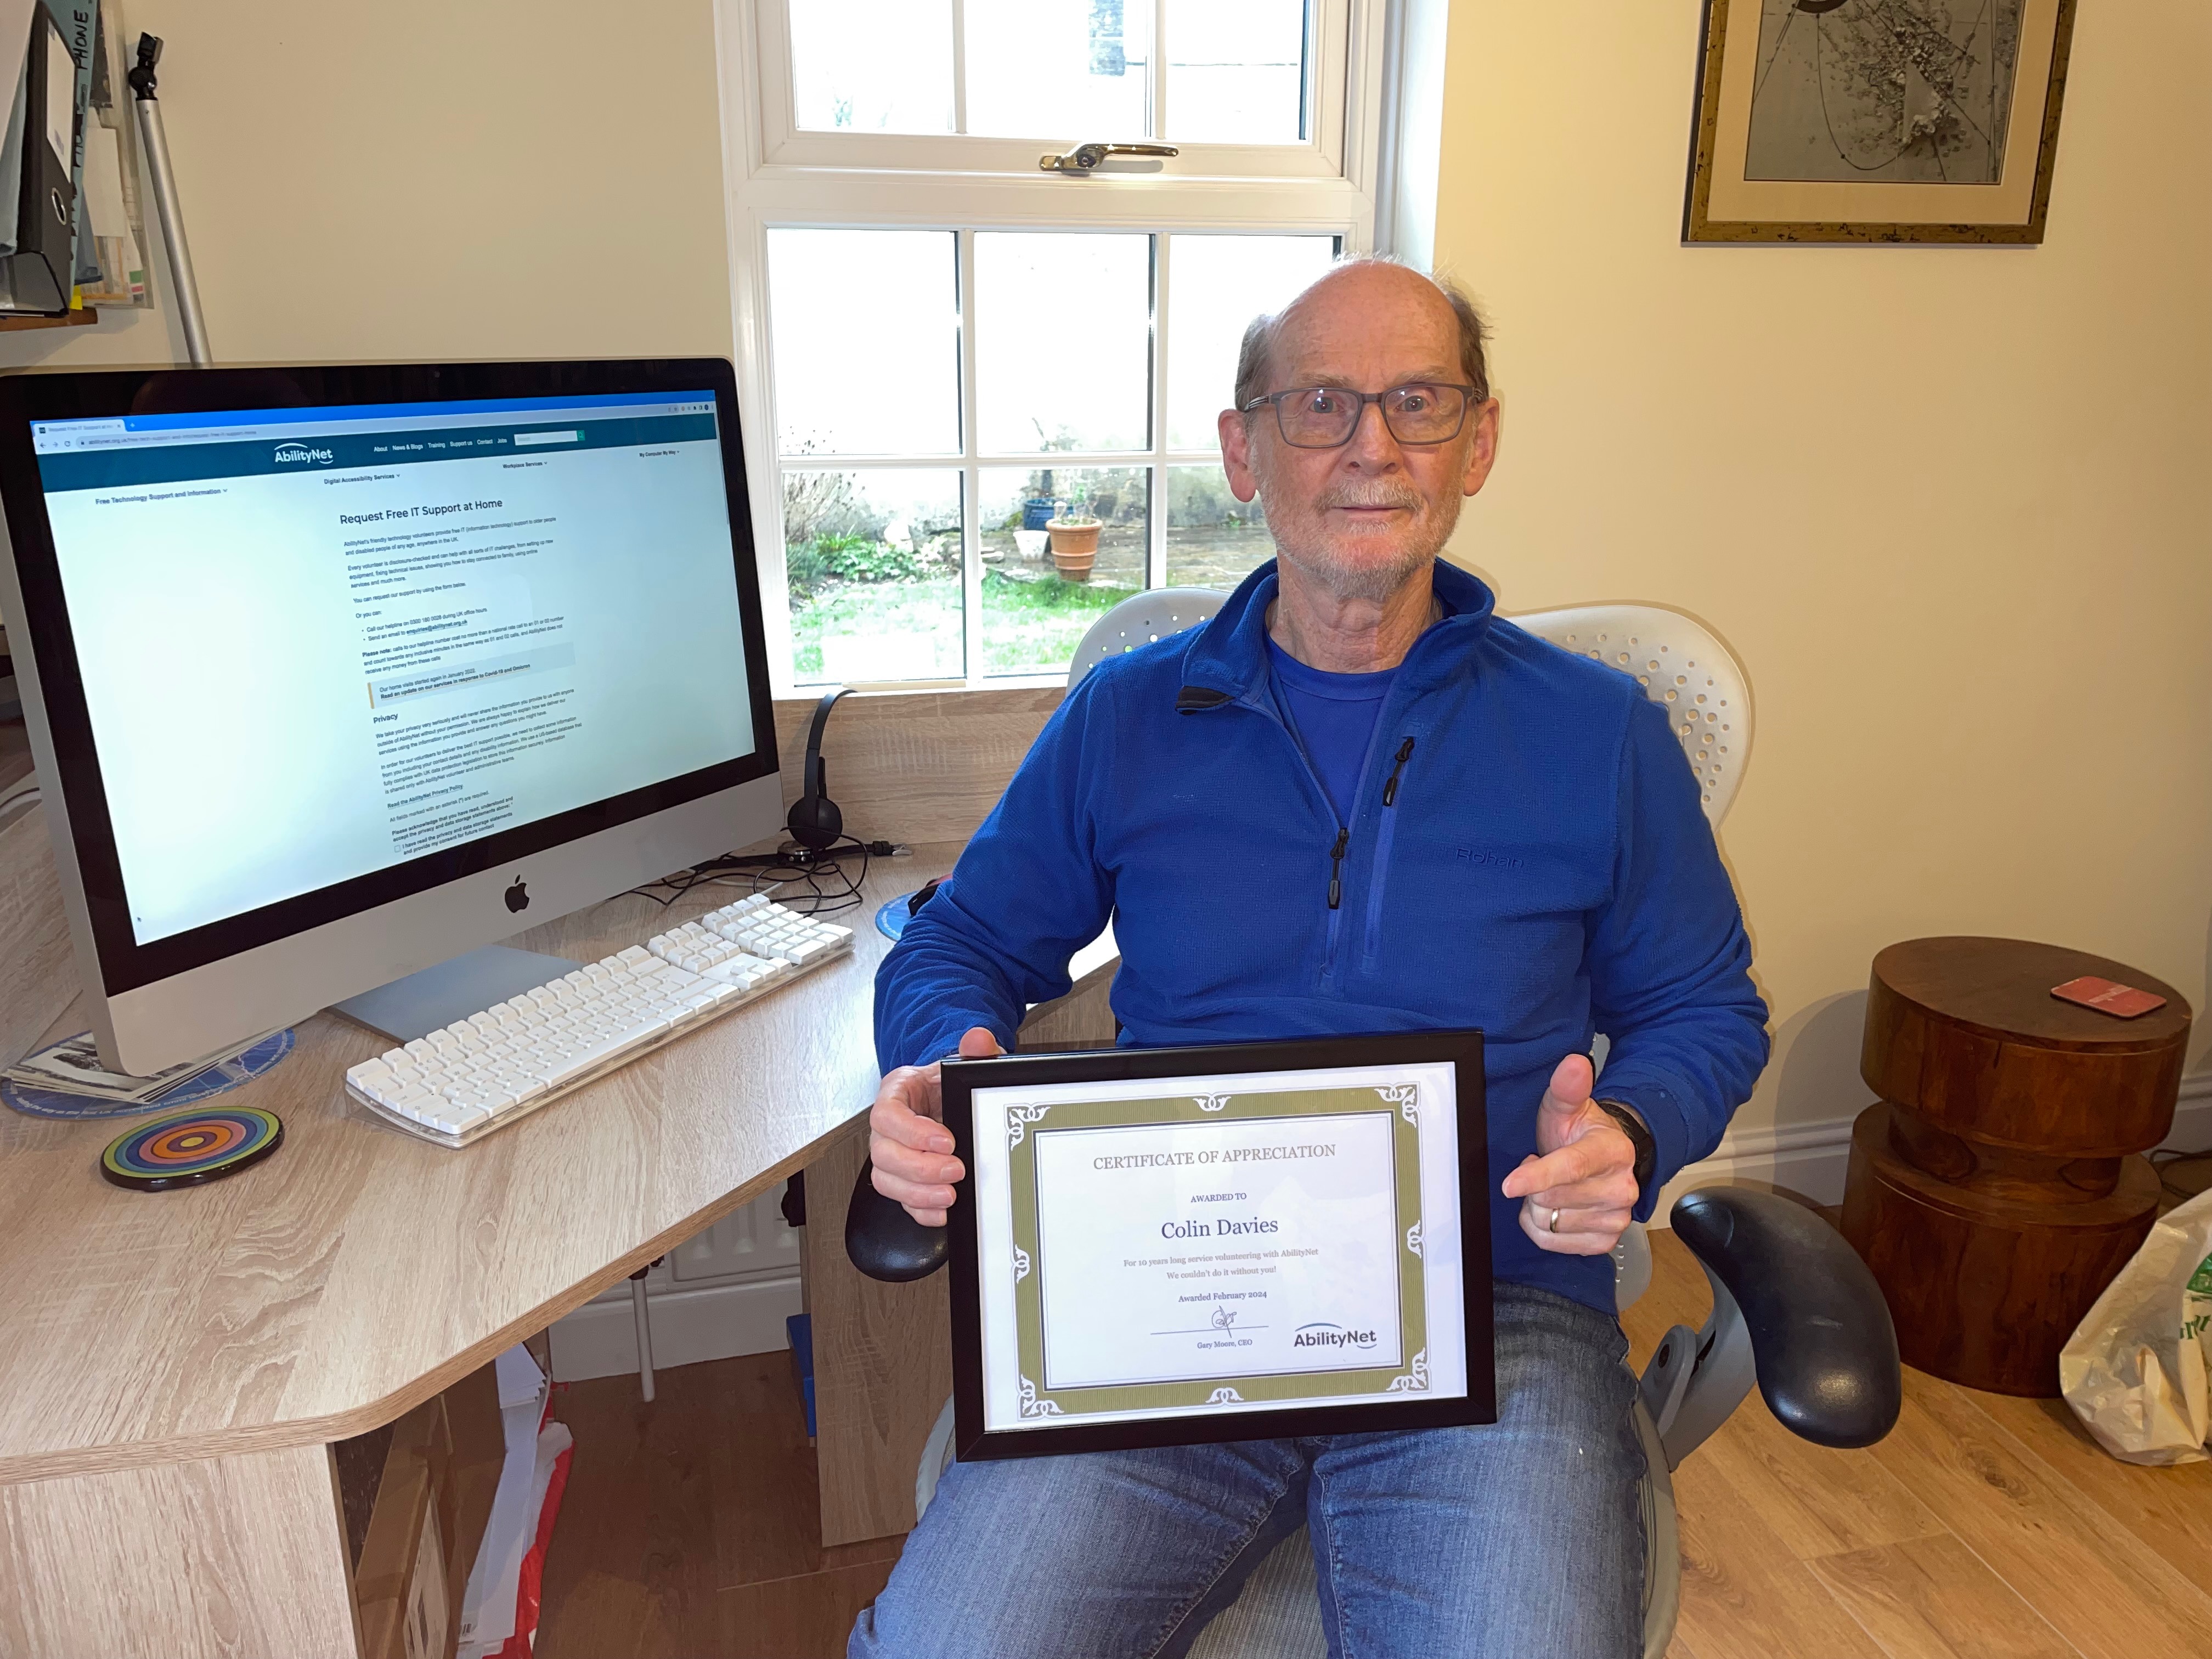 Colin Davies sitting at a desk holding a certificate for 10 years of service